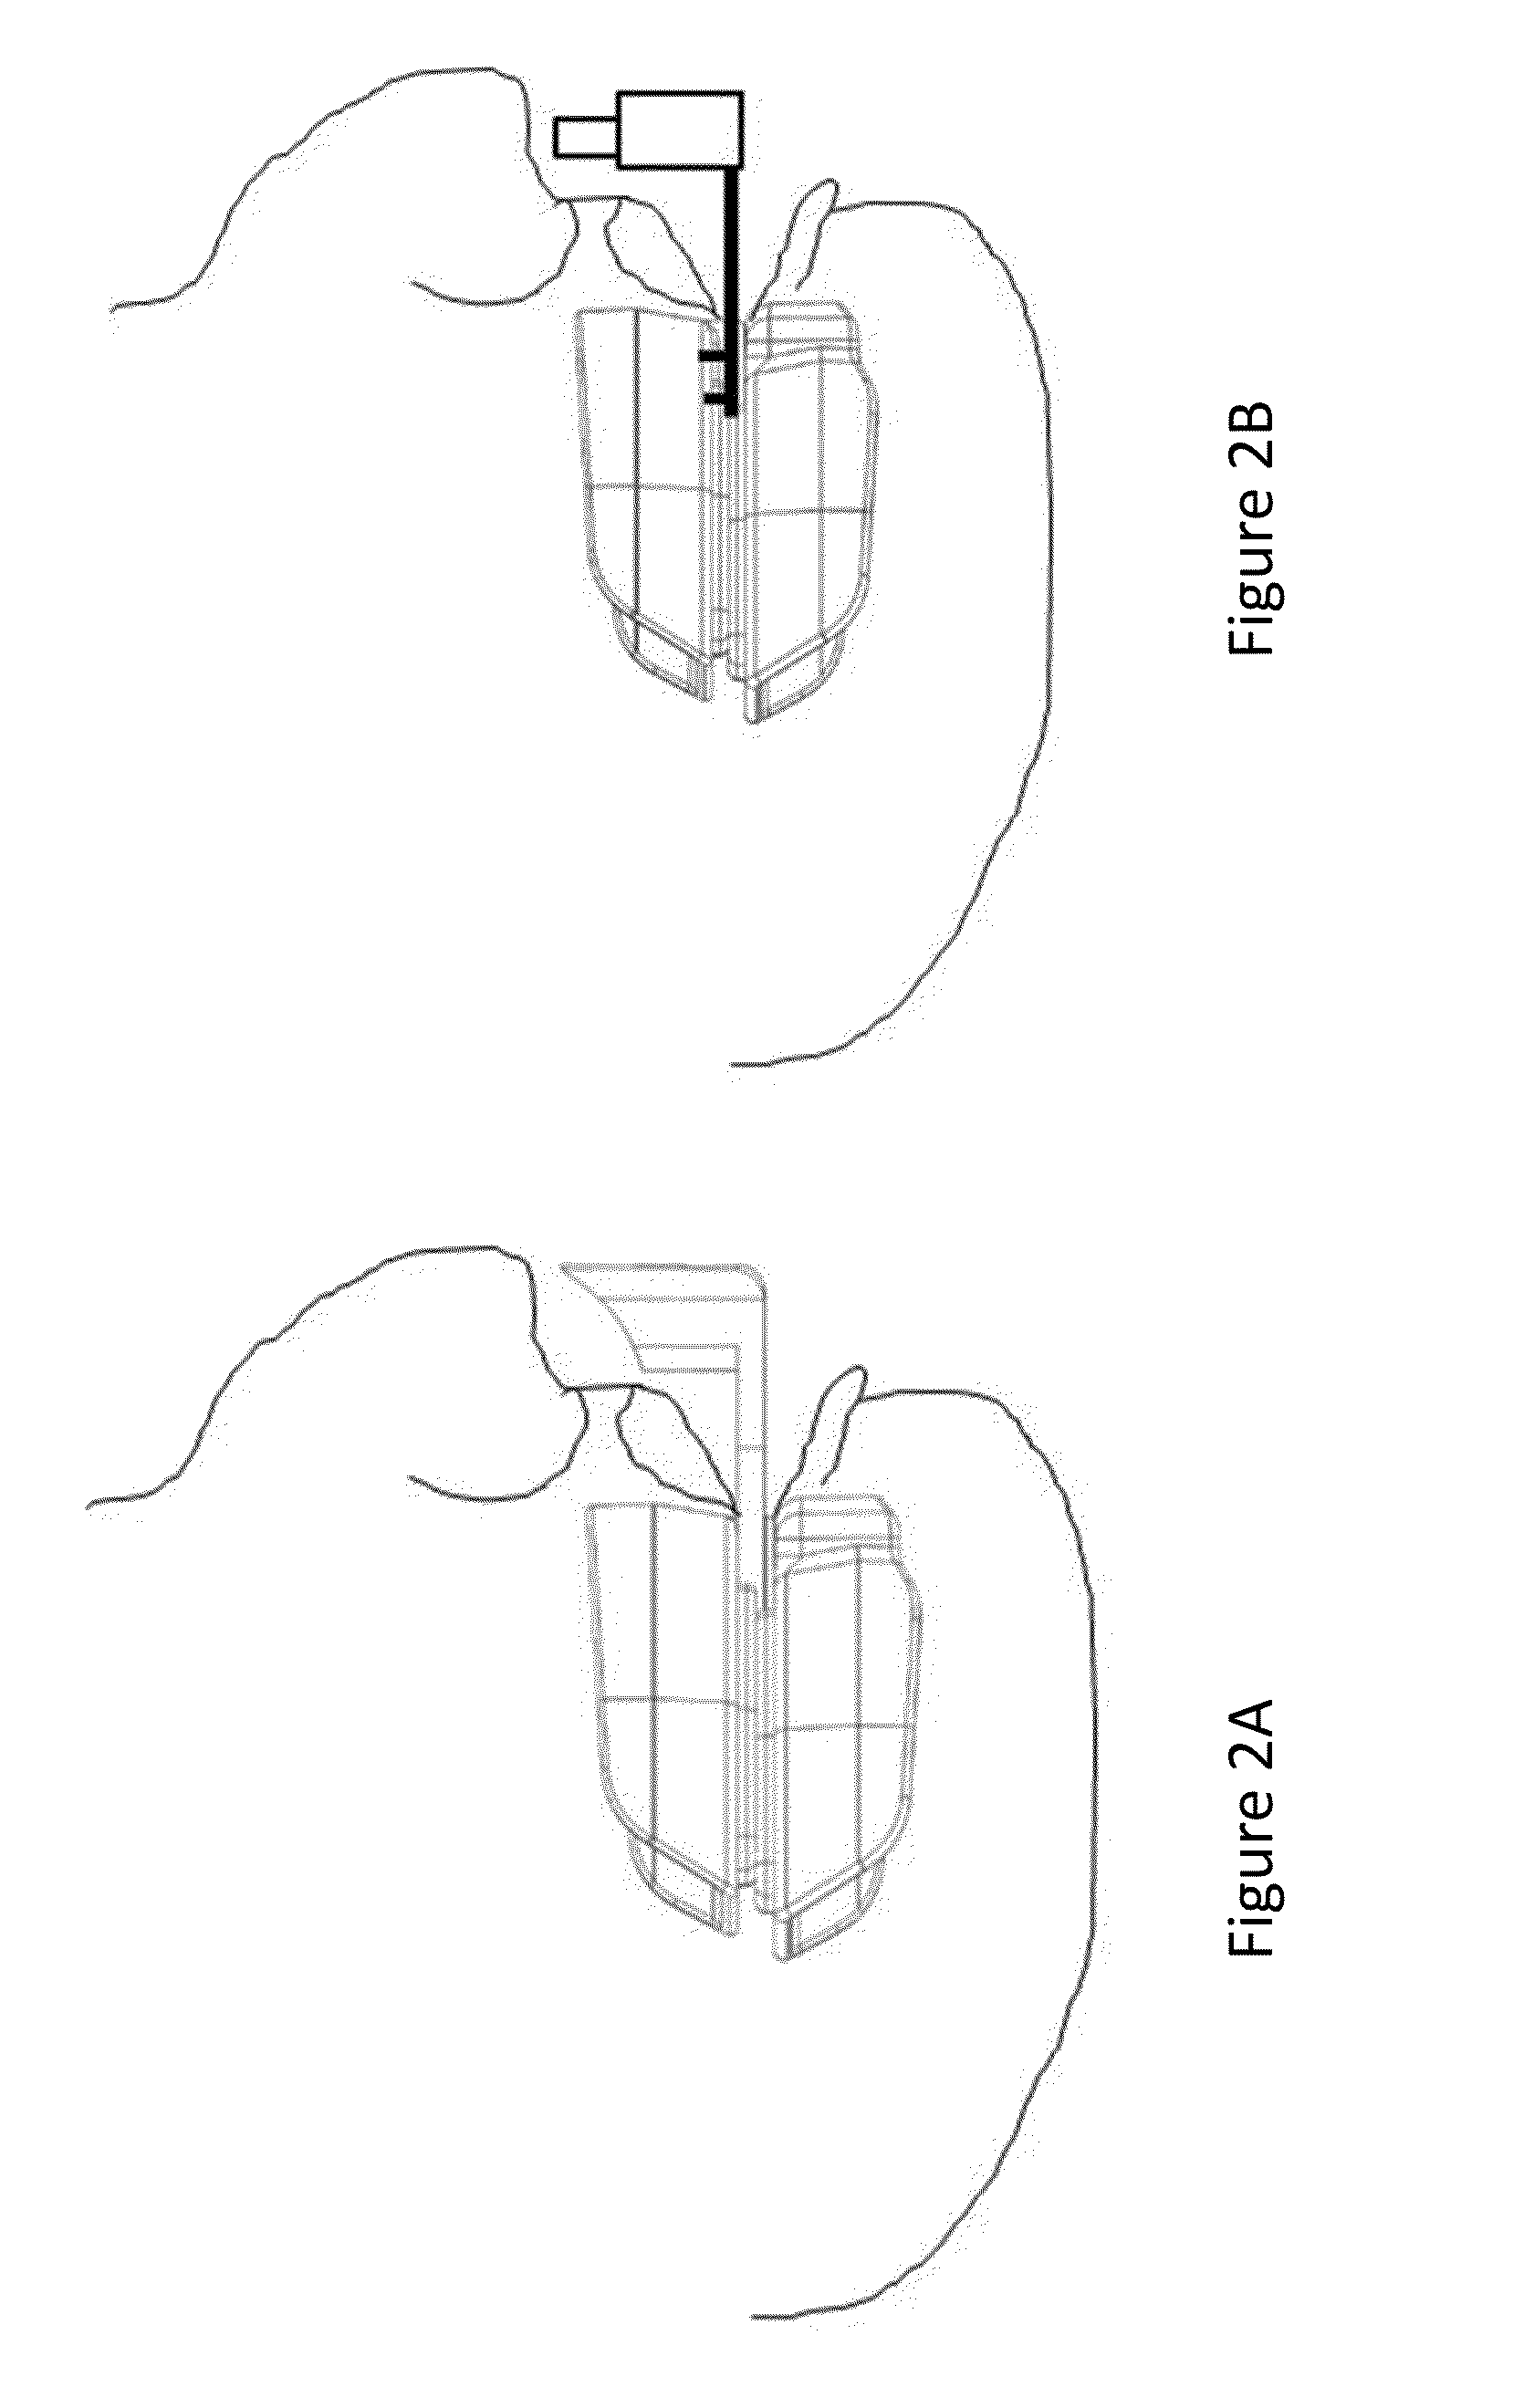 Oral Appliance Monitor and Method of Using the Same